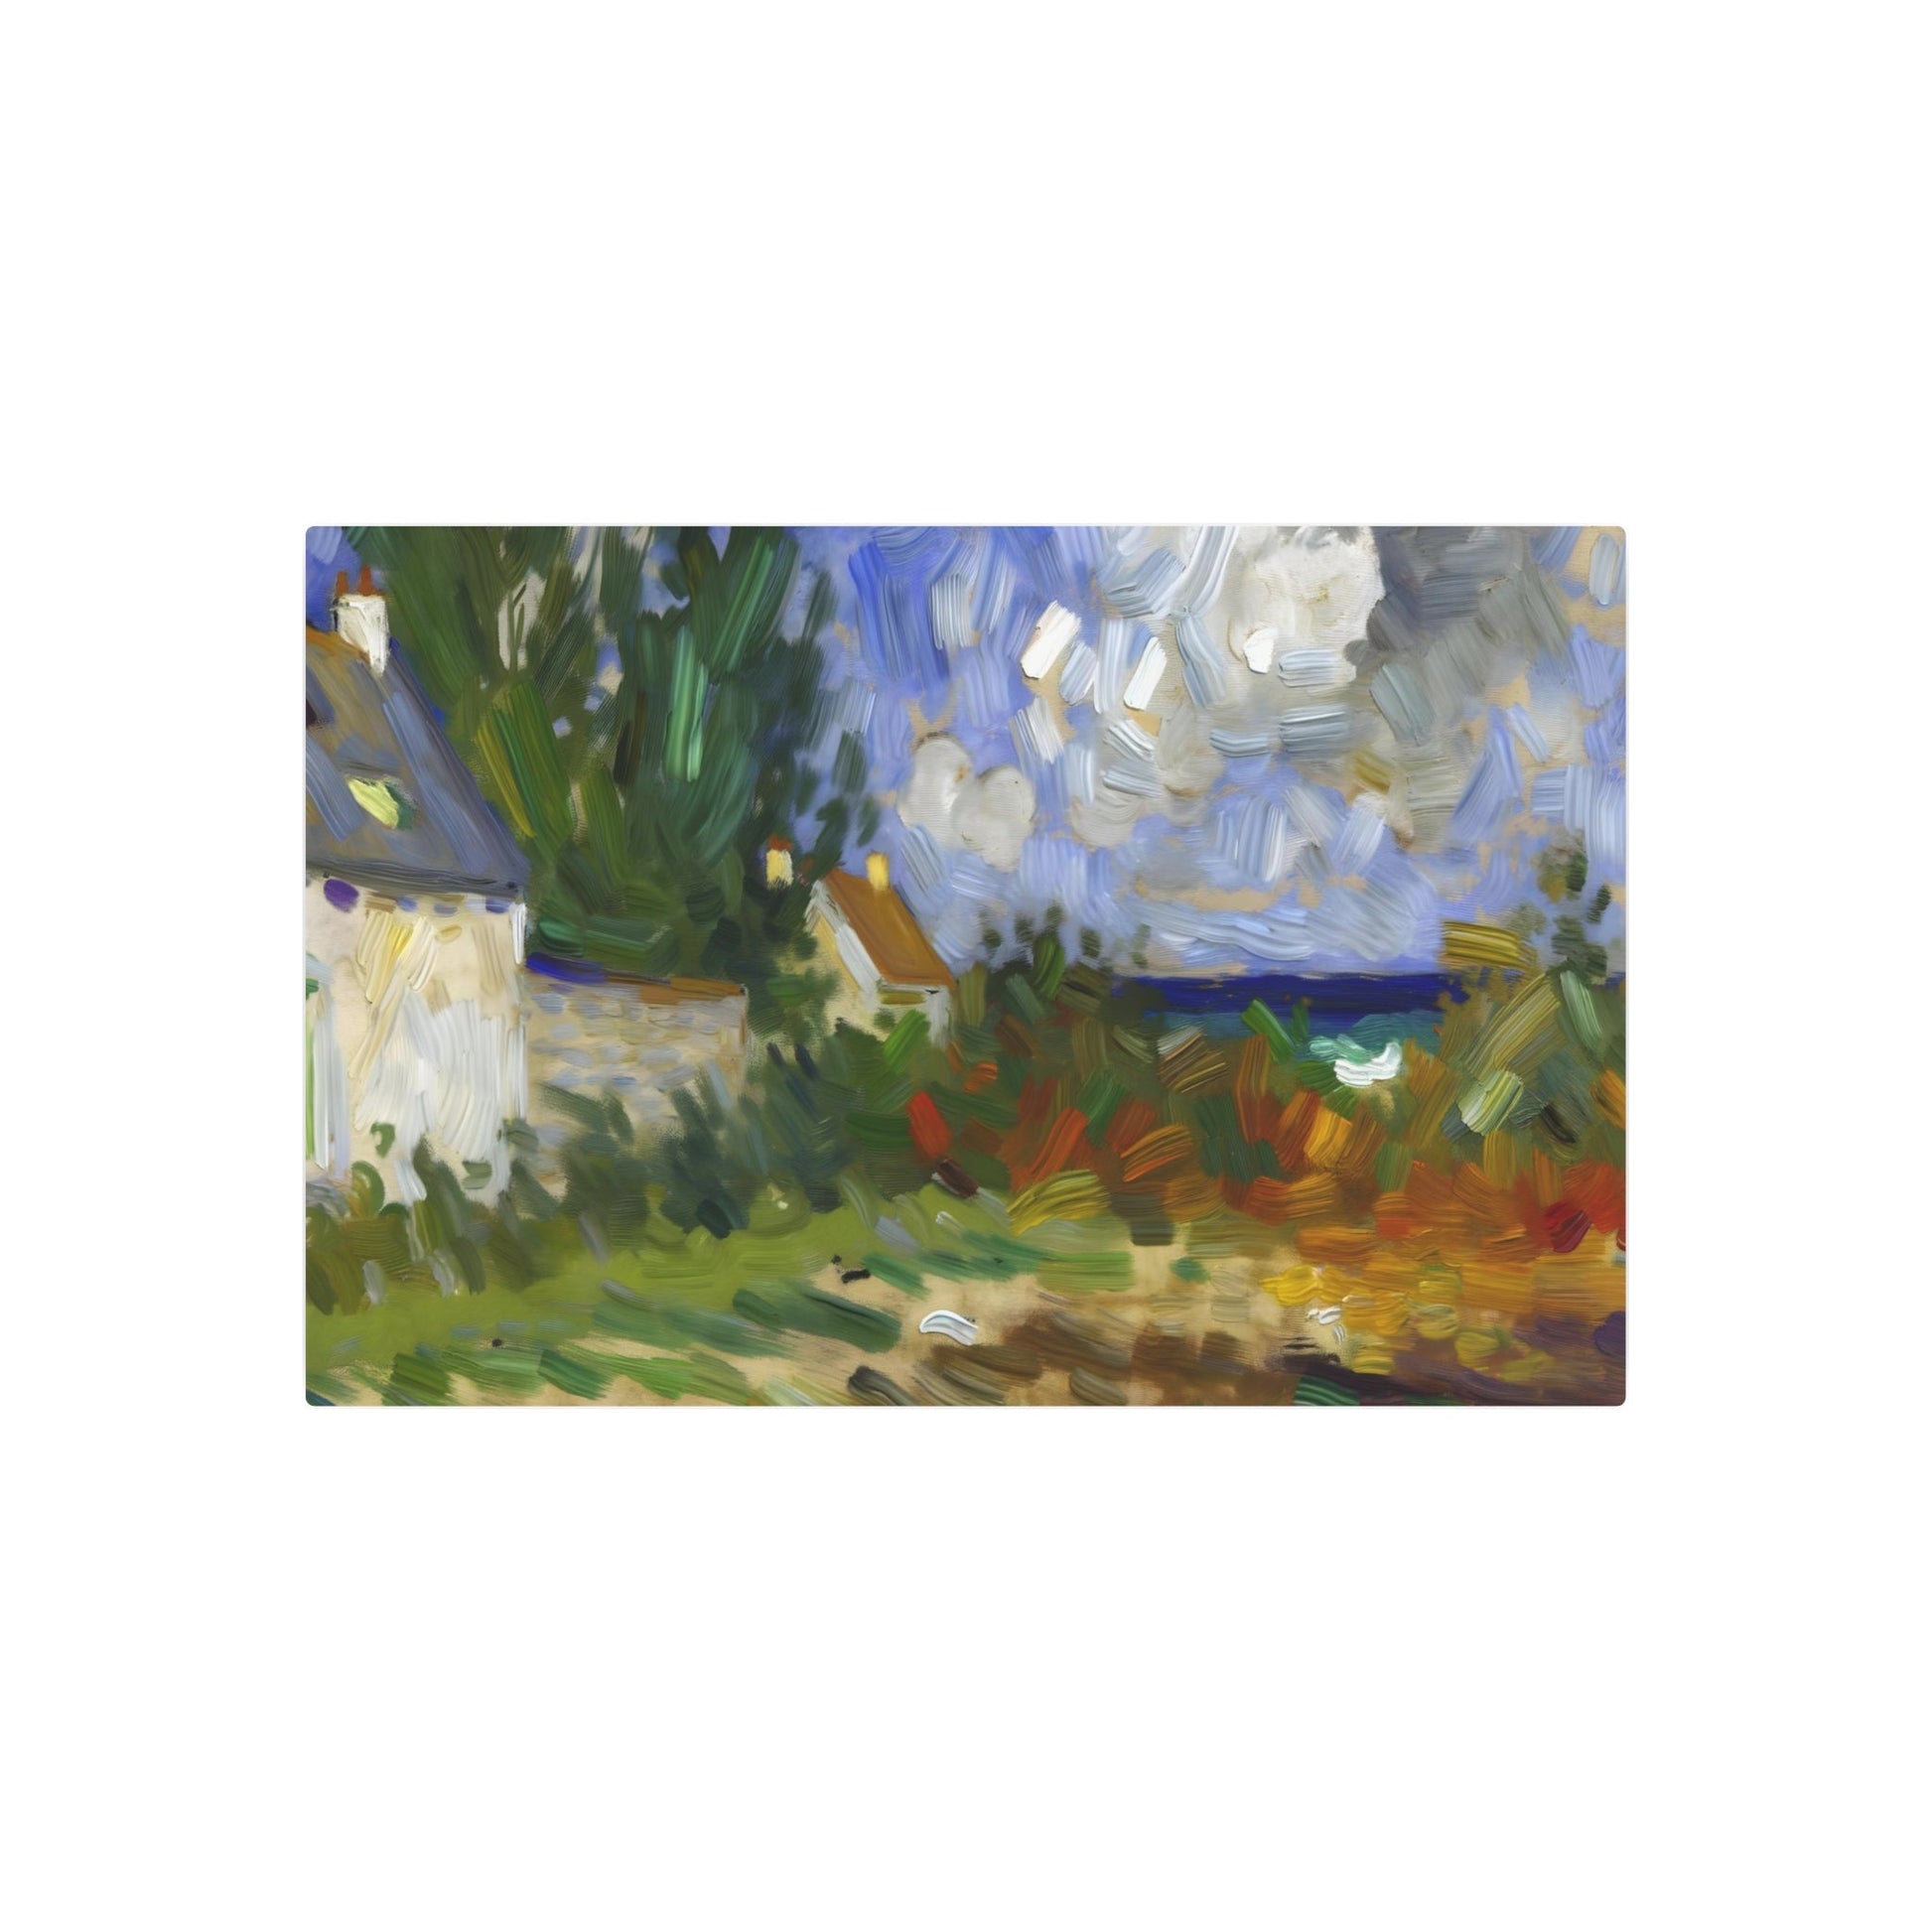 Metal Poster Art | "Impressionism-Inspired Artwork: Vivid Color Display with Emphasized Changing Light Qualities - Western Art Styles" - Metal Poster Art 36″ x 24″ (Horizontal) 0.12''